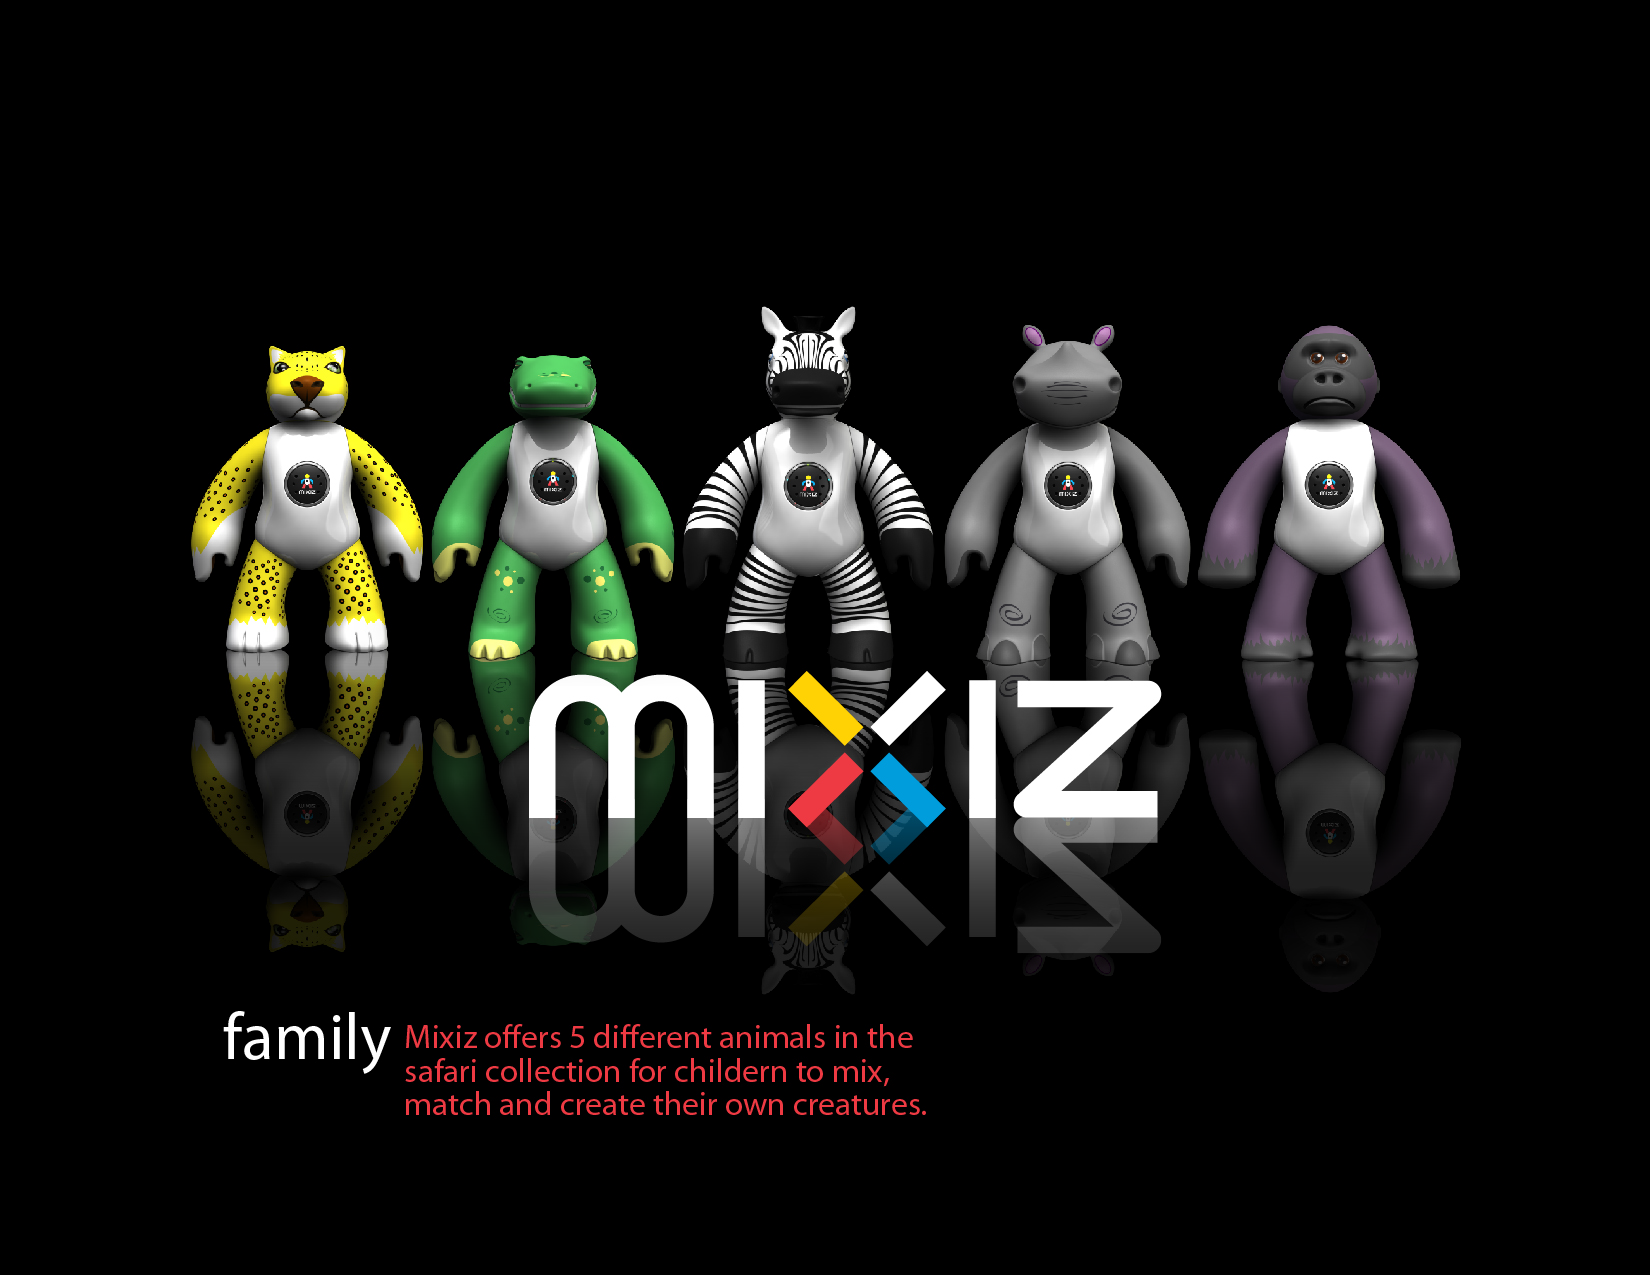 110212-NYC-mixiz-toy-presentation_Page_14.png